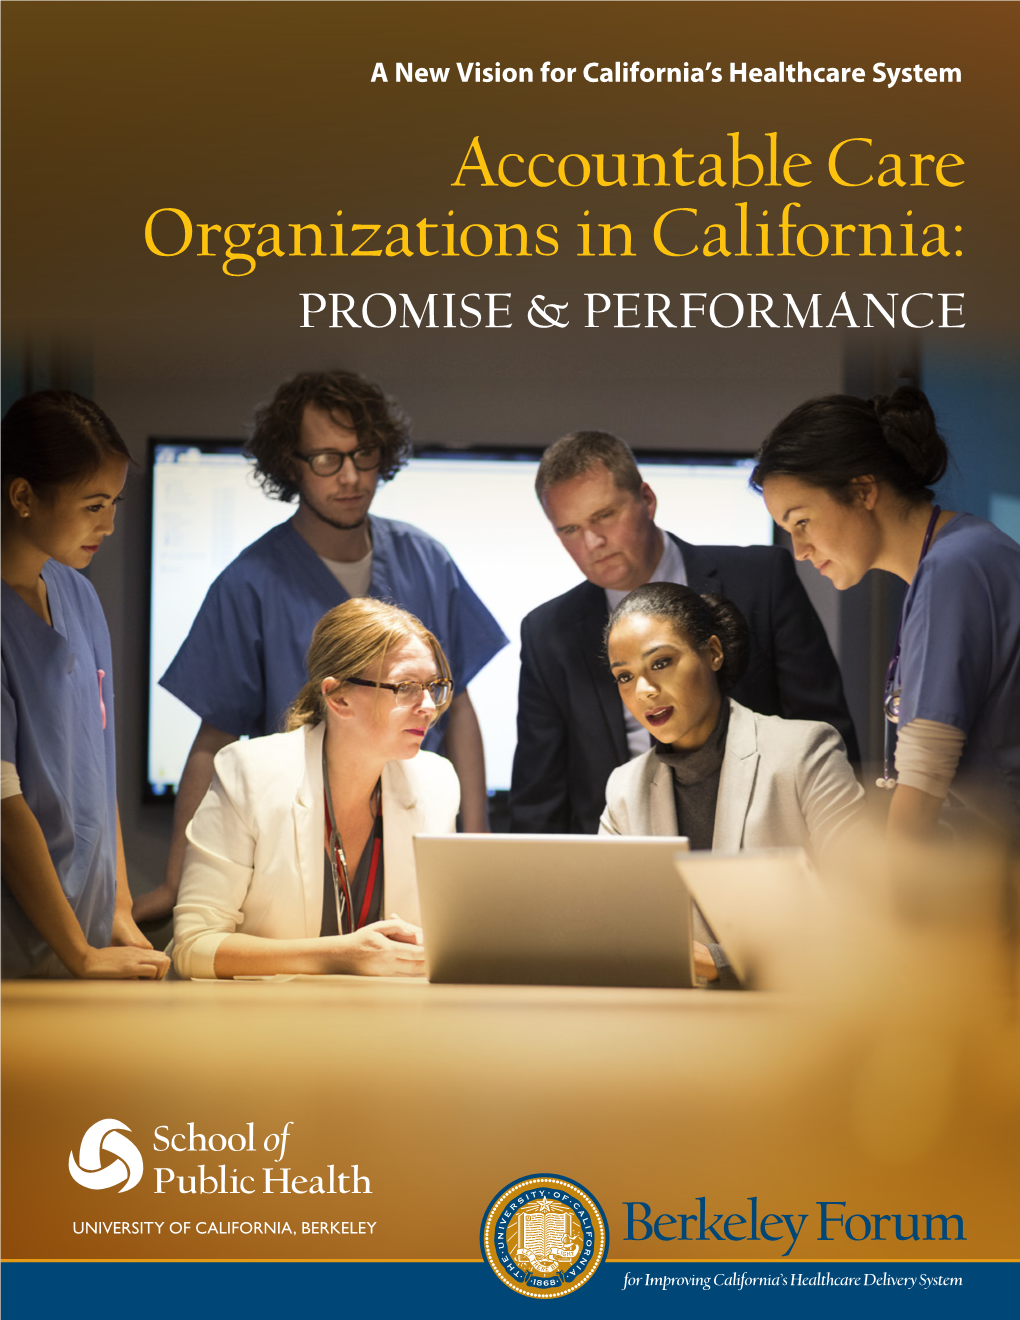 Accountable Care Organizations in California: Promise & Performance